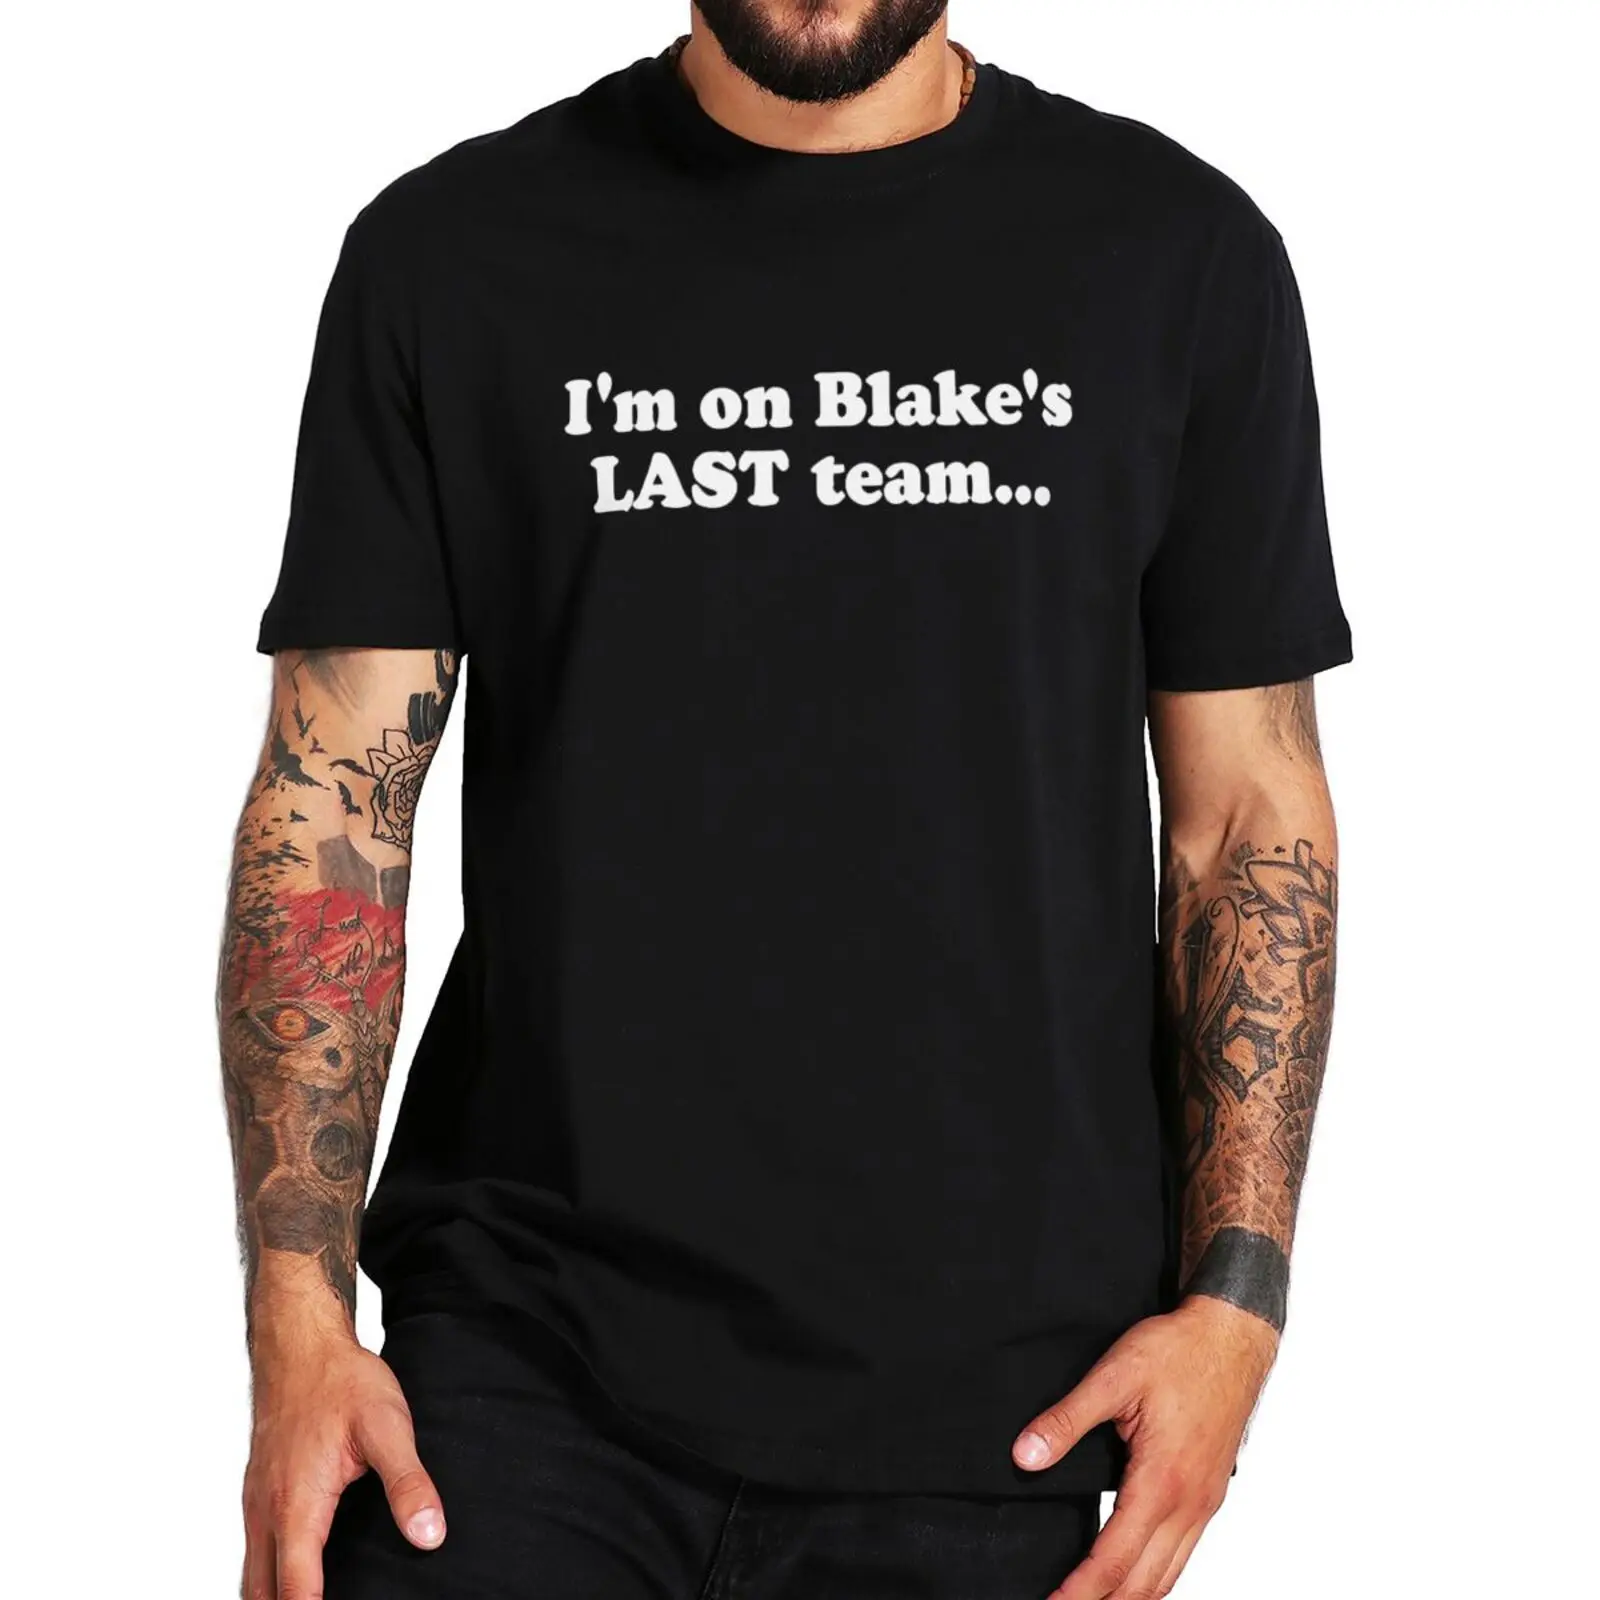 

I'm On Blake's Last Team And All I Got Was This Lousy T-shirt Funny Quotes Fans Gift Tops 100% Cotton Unisex T Shirts EU Size